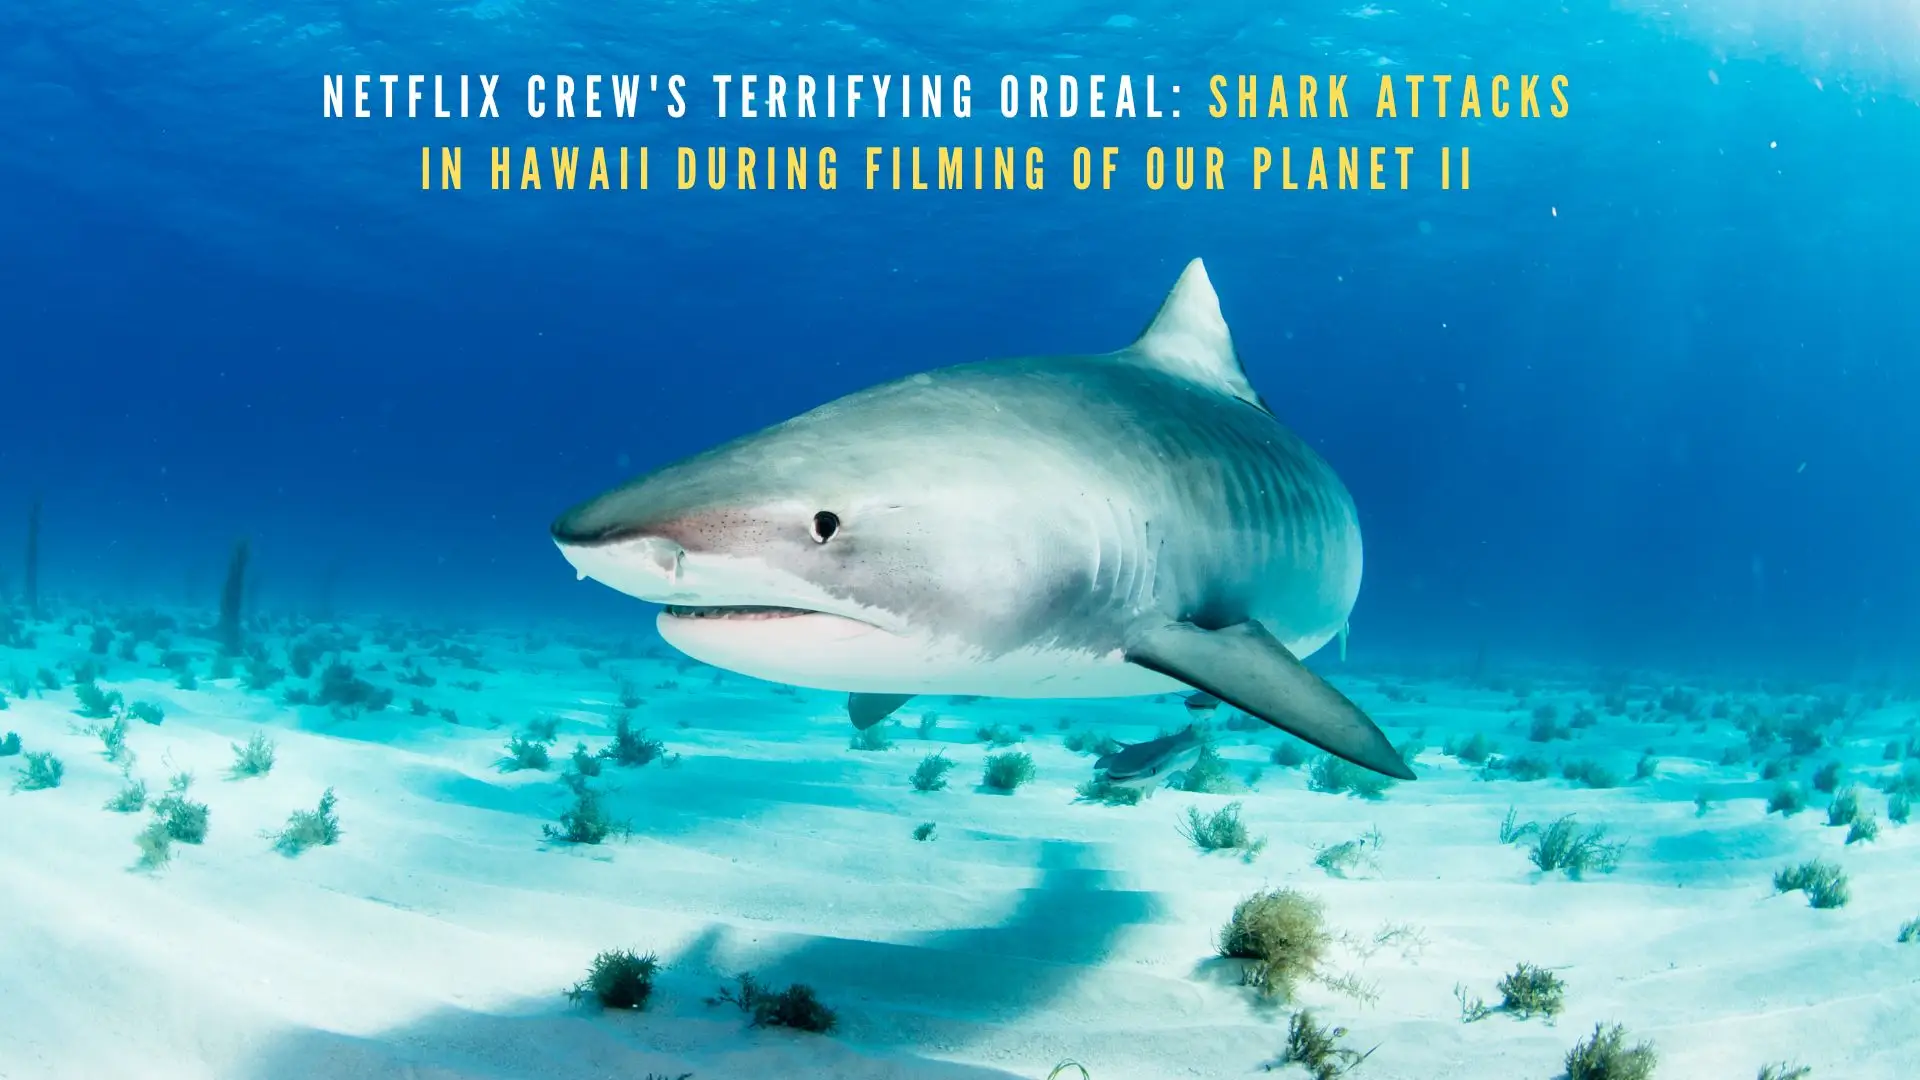 Netflix Crew's Terrifying Ordeal: Shark Attacks in Hawaii During Filming of Our Planet II